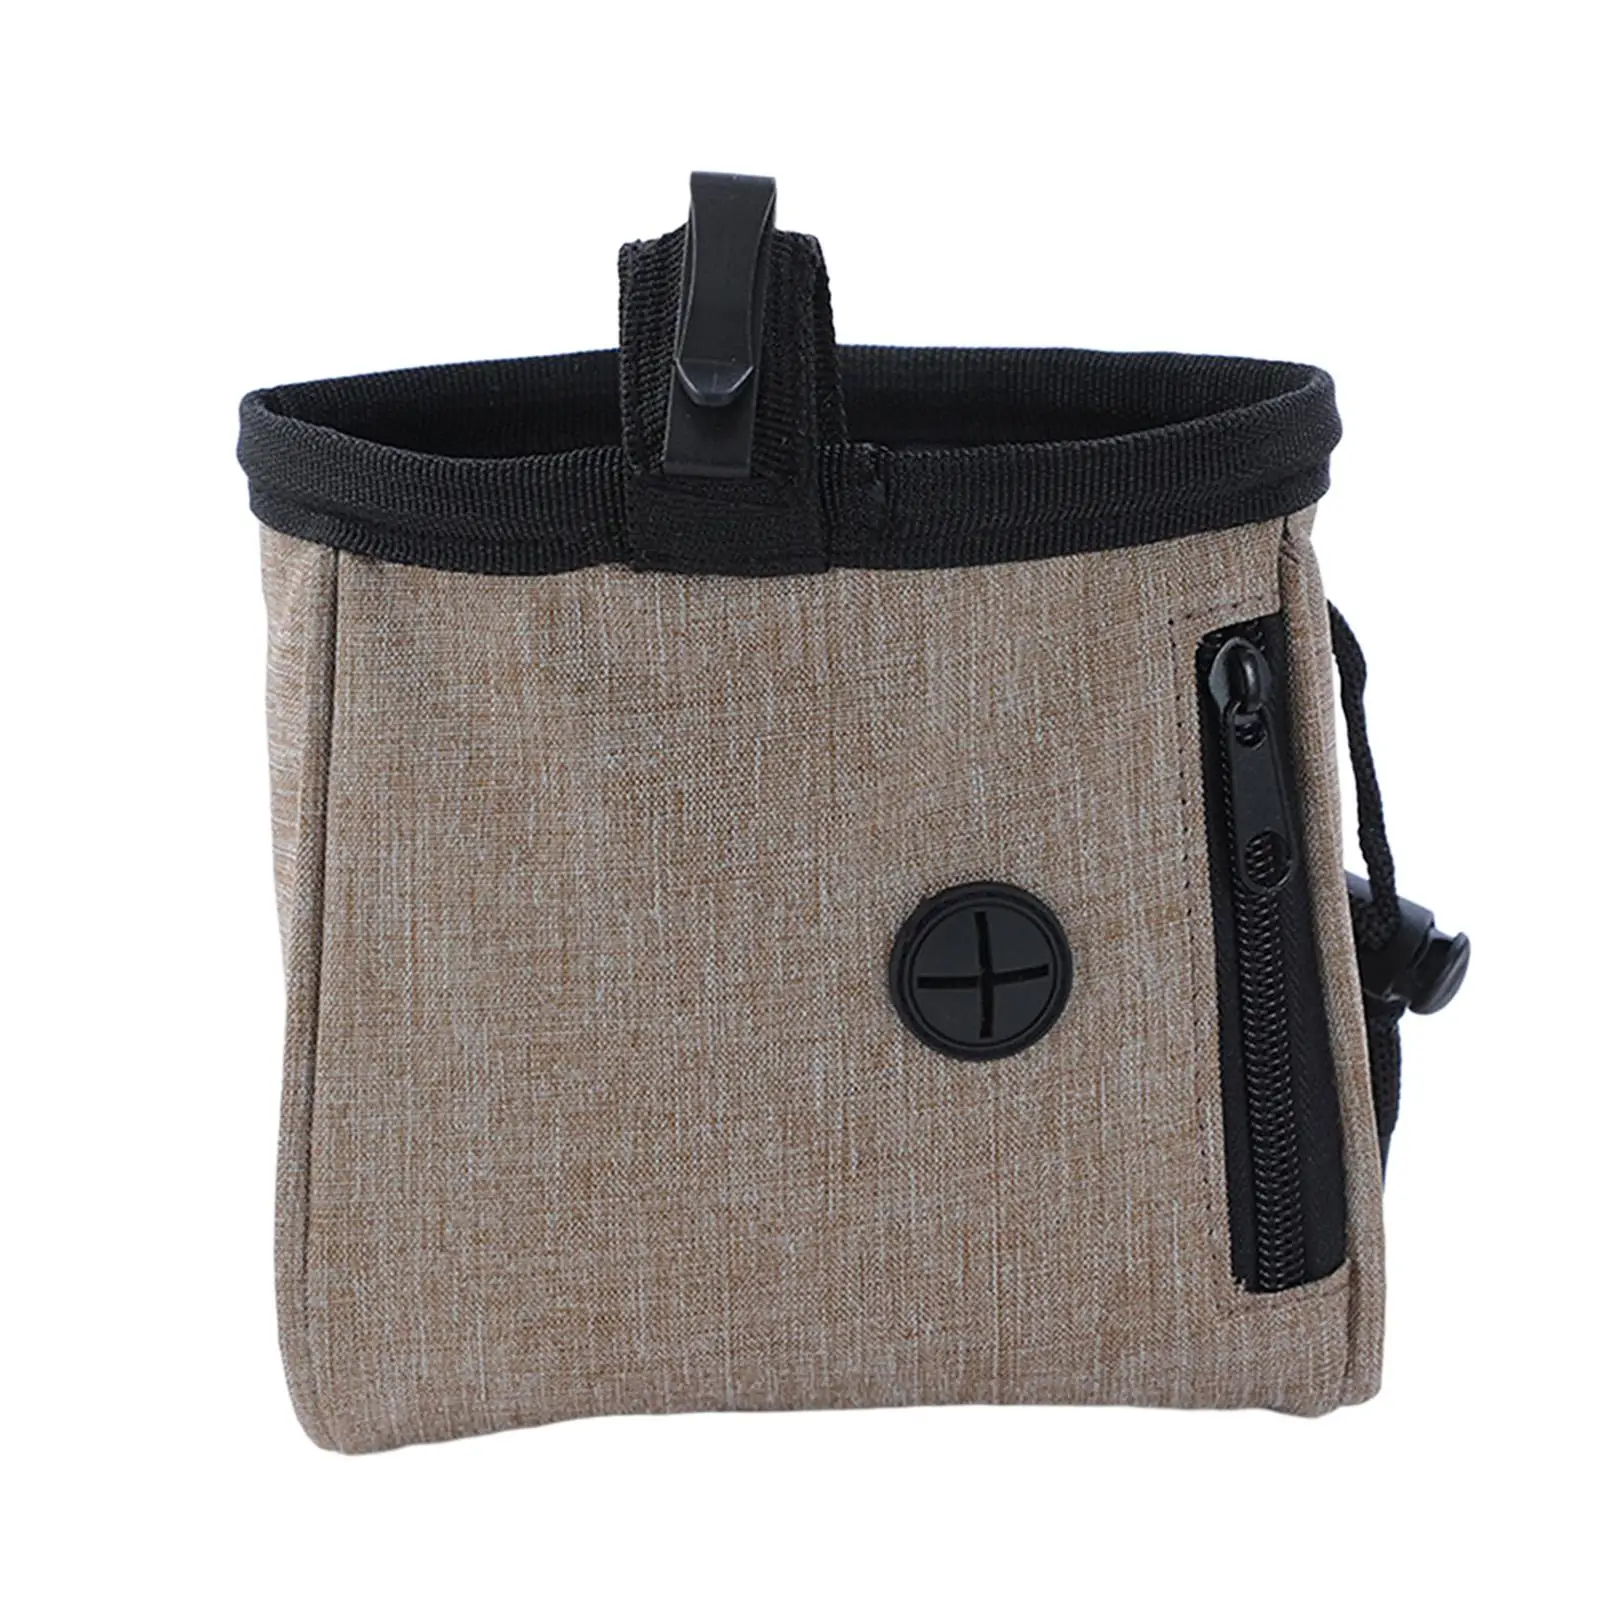 Dogs Training Pouch Multifunction Carry Snacks Toys Training Dog Puppy Waist Bag for Daily Outdoor Hiking Travel Jogging